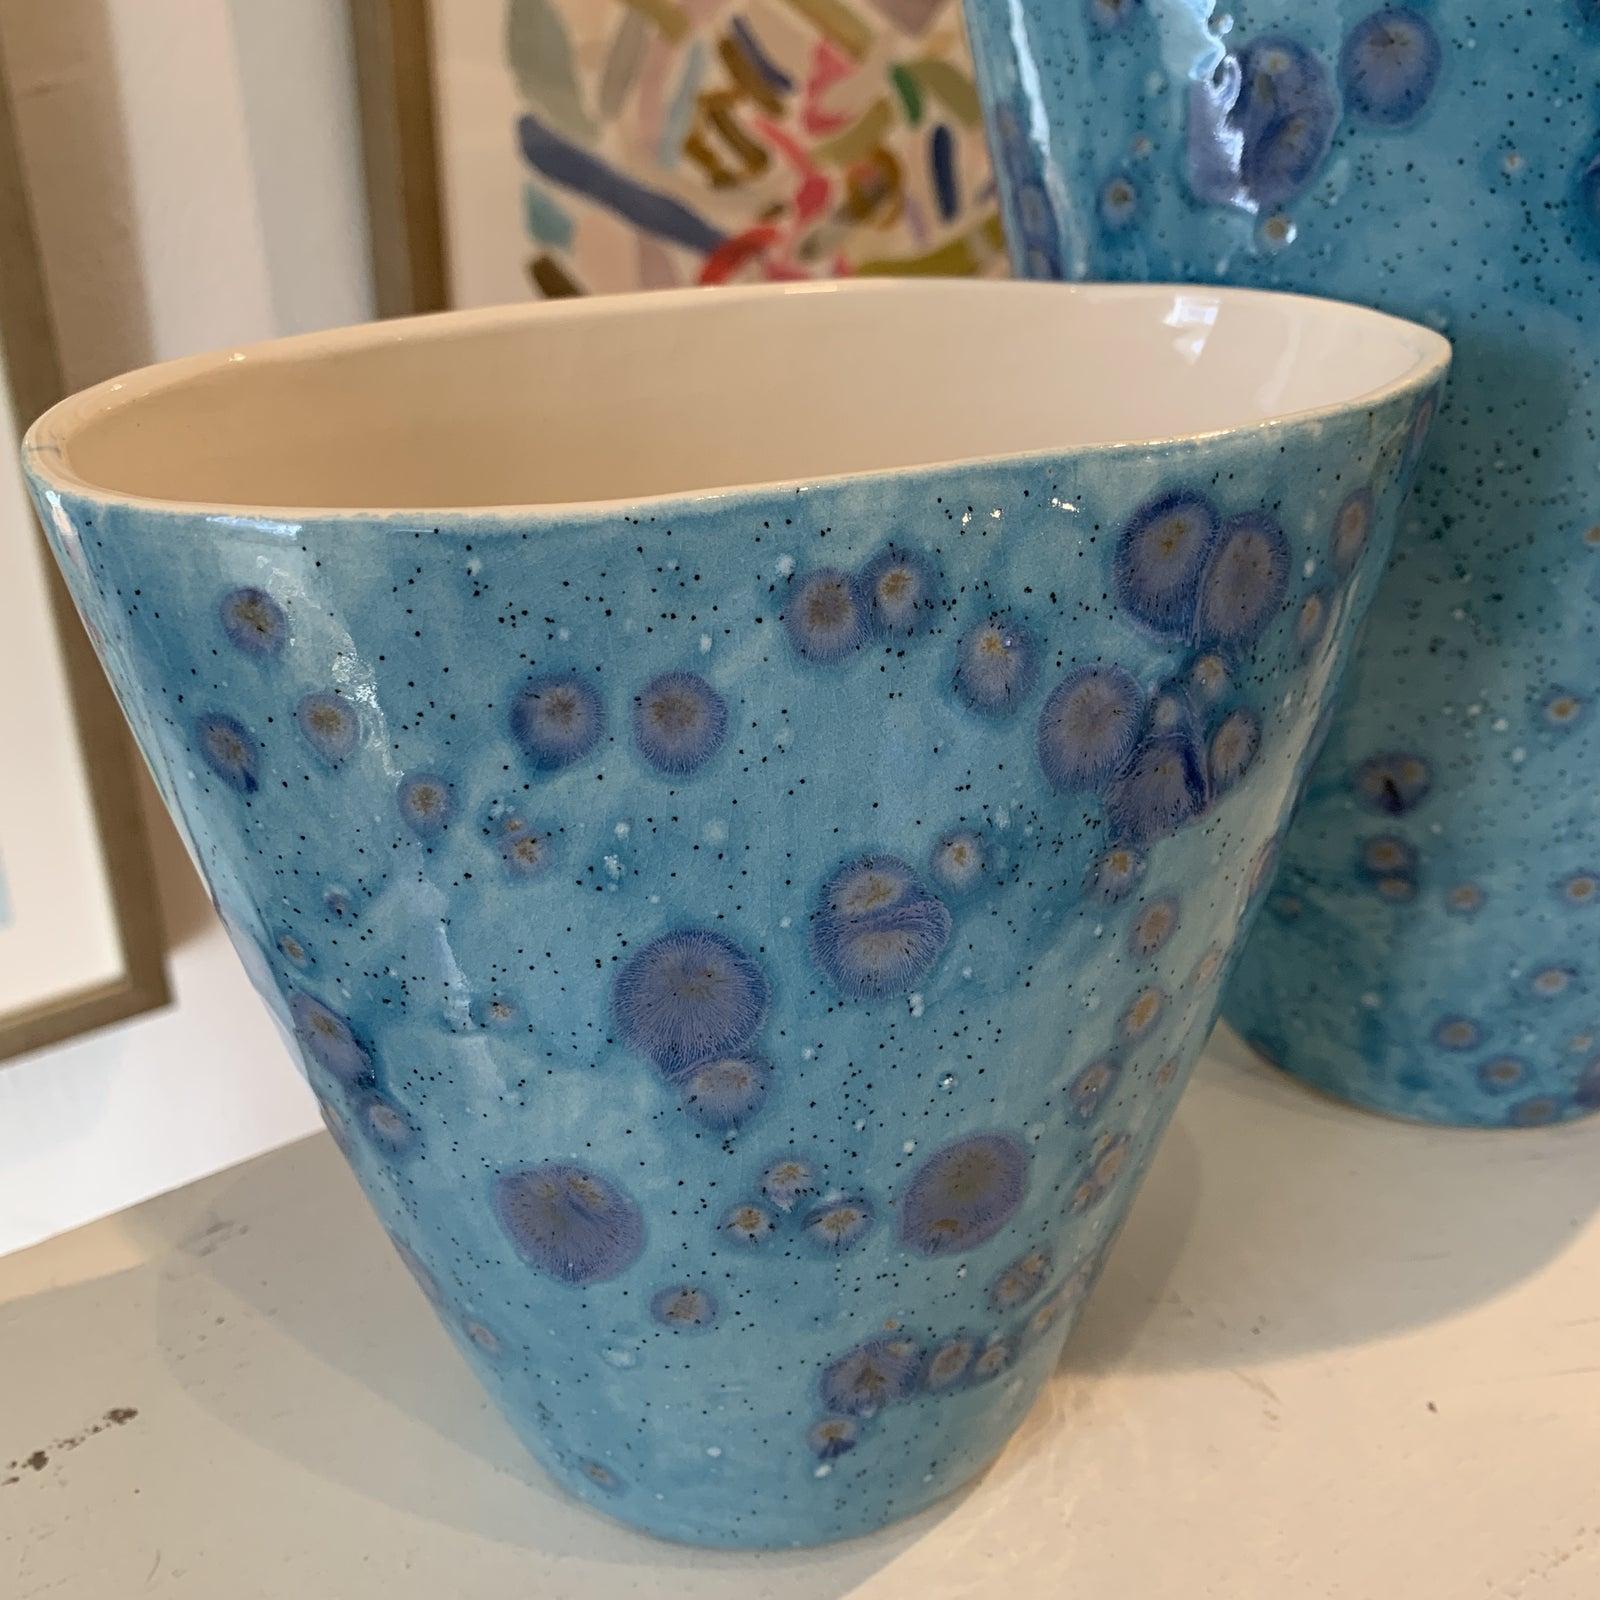 Pair of handmade blue and purple vases. Artist hand makes each piece in her Atlanta studio.
Somewhere between impressionism and abstraction, Stephanie Wheeler’s paintings take on a life of their own. She began her career in Atlanta as a classic